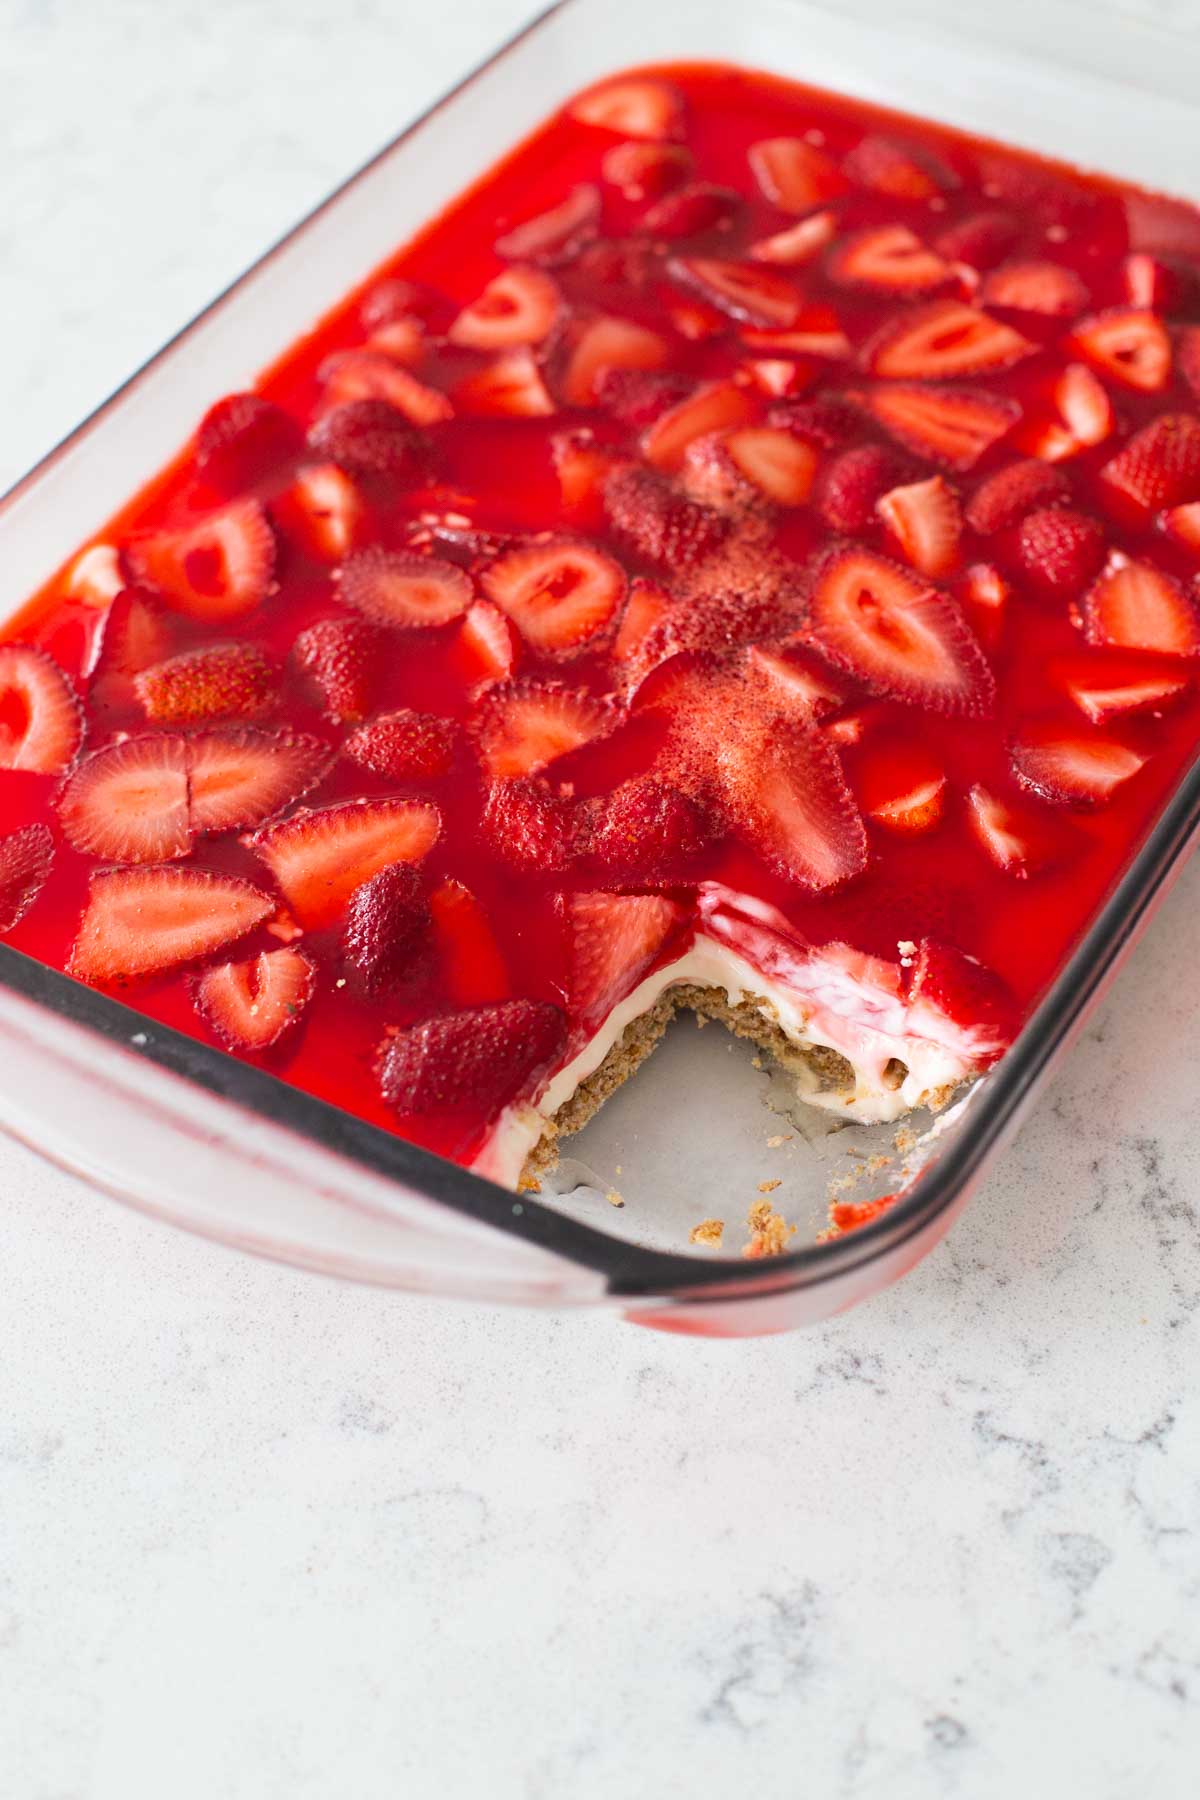 The 9x13-inch pan of strawberry pretzel salad has a slice missing.